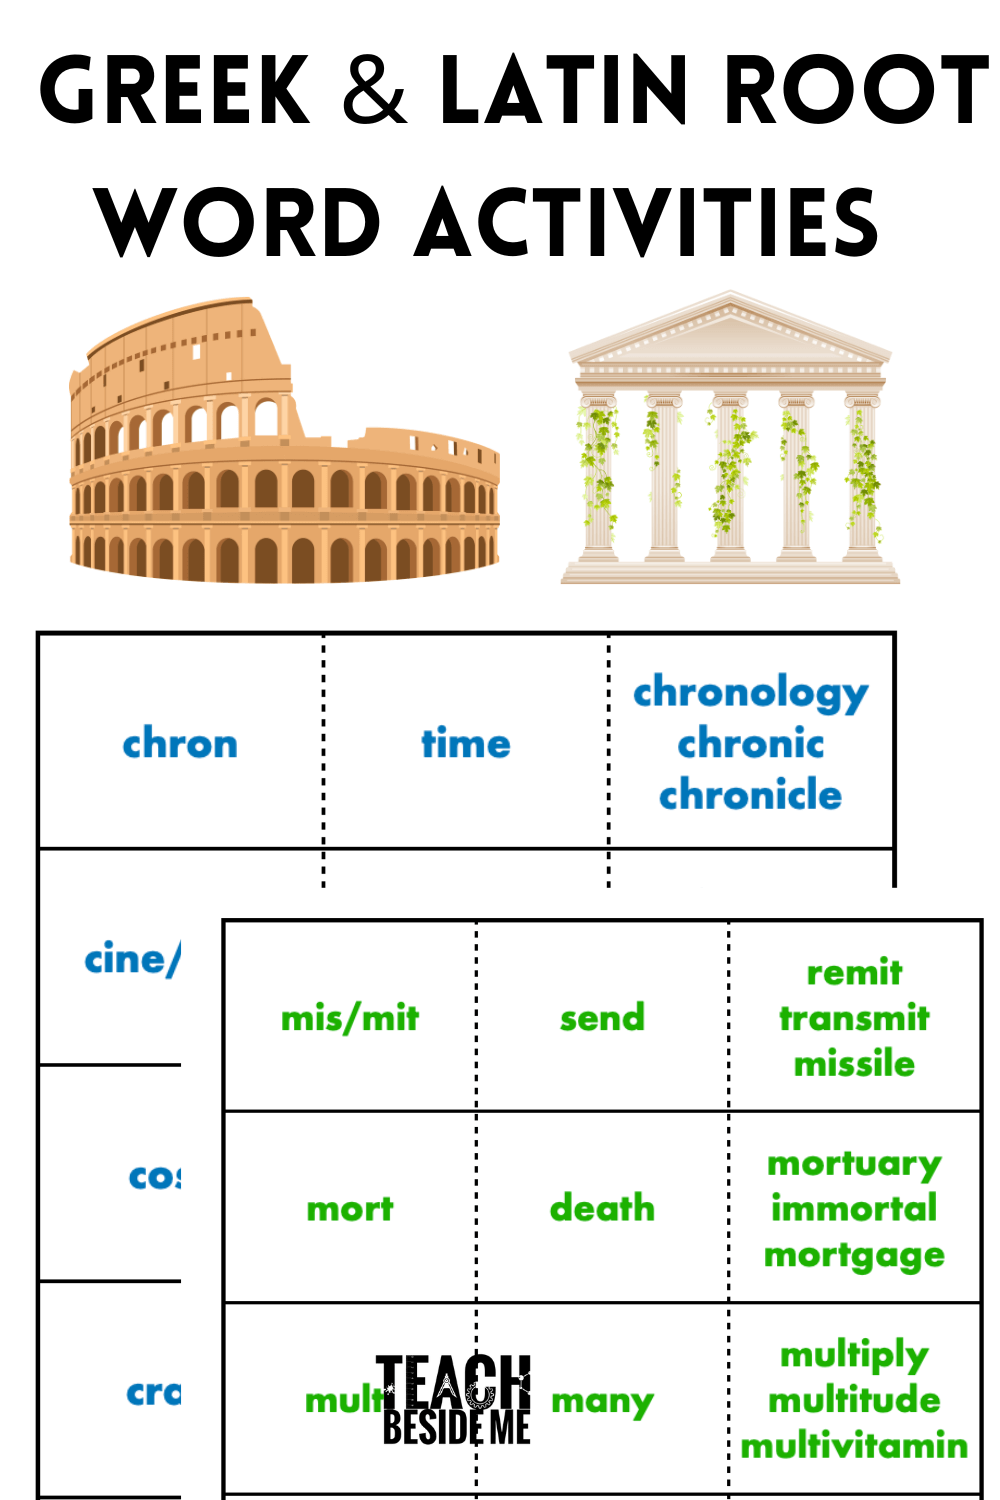 Greek And Latin Roots Worksheets And Activities - Teach Beside Me with regard to Free Printable Greek And Latin Roots